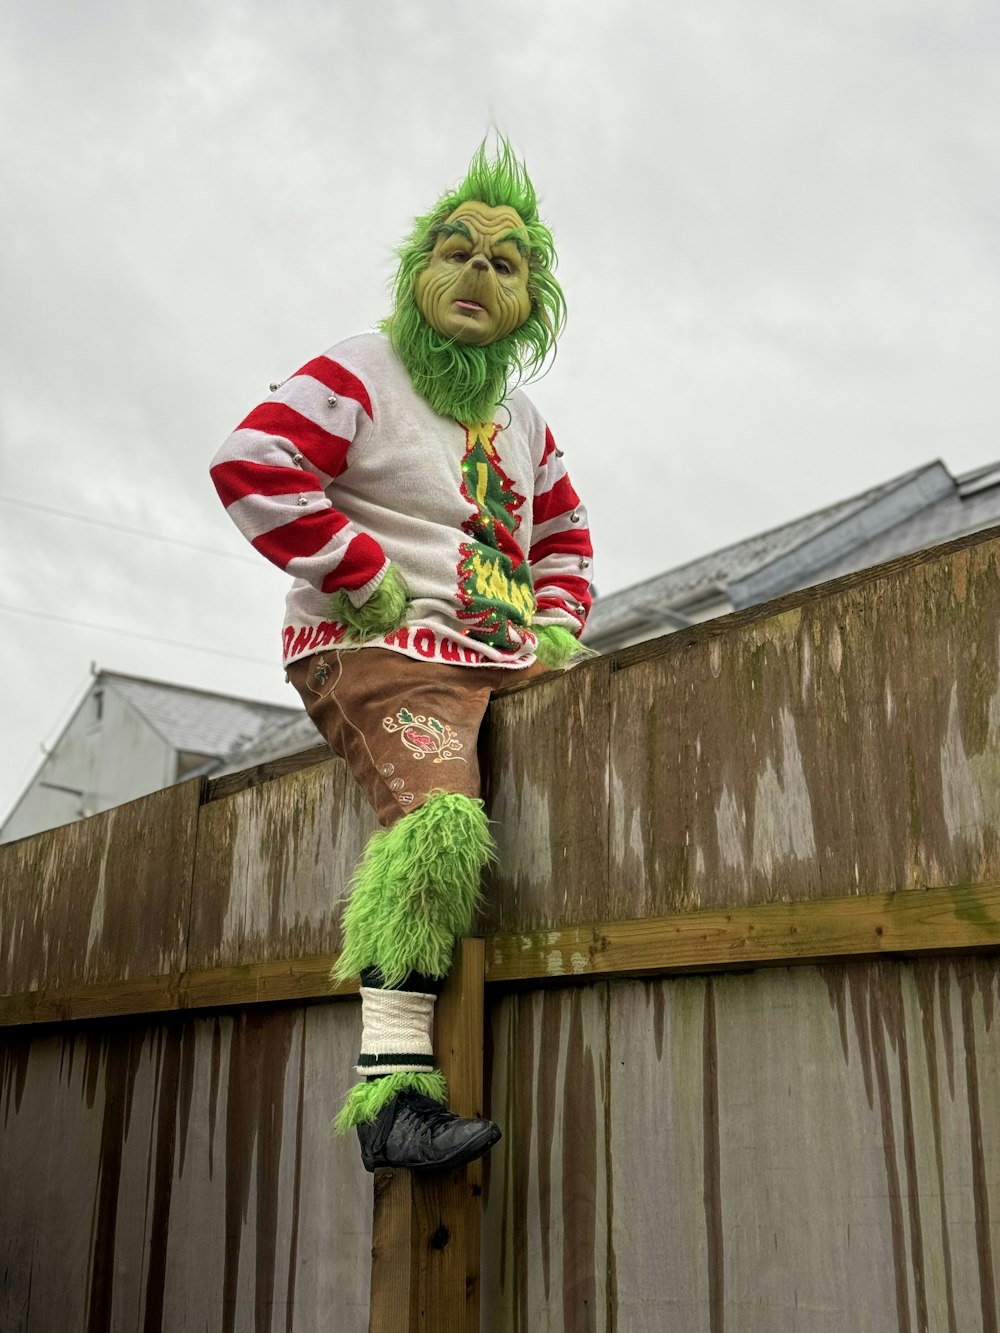 a man in a green costume standing on top of a wooden fence